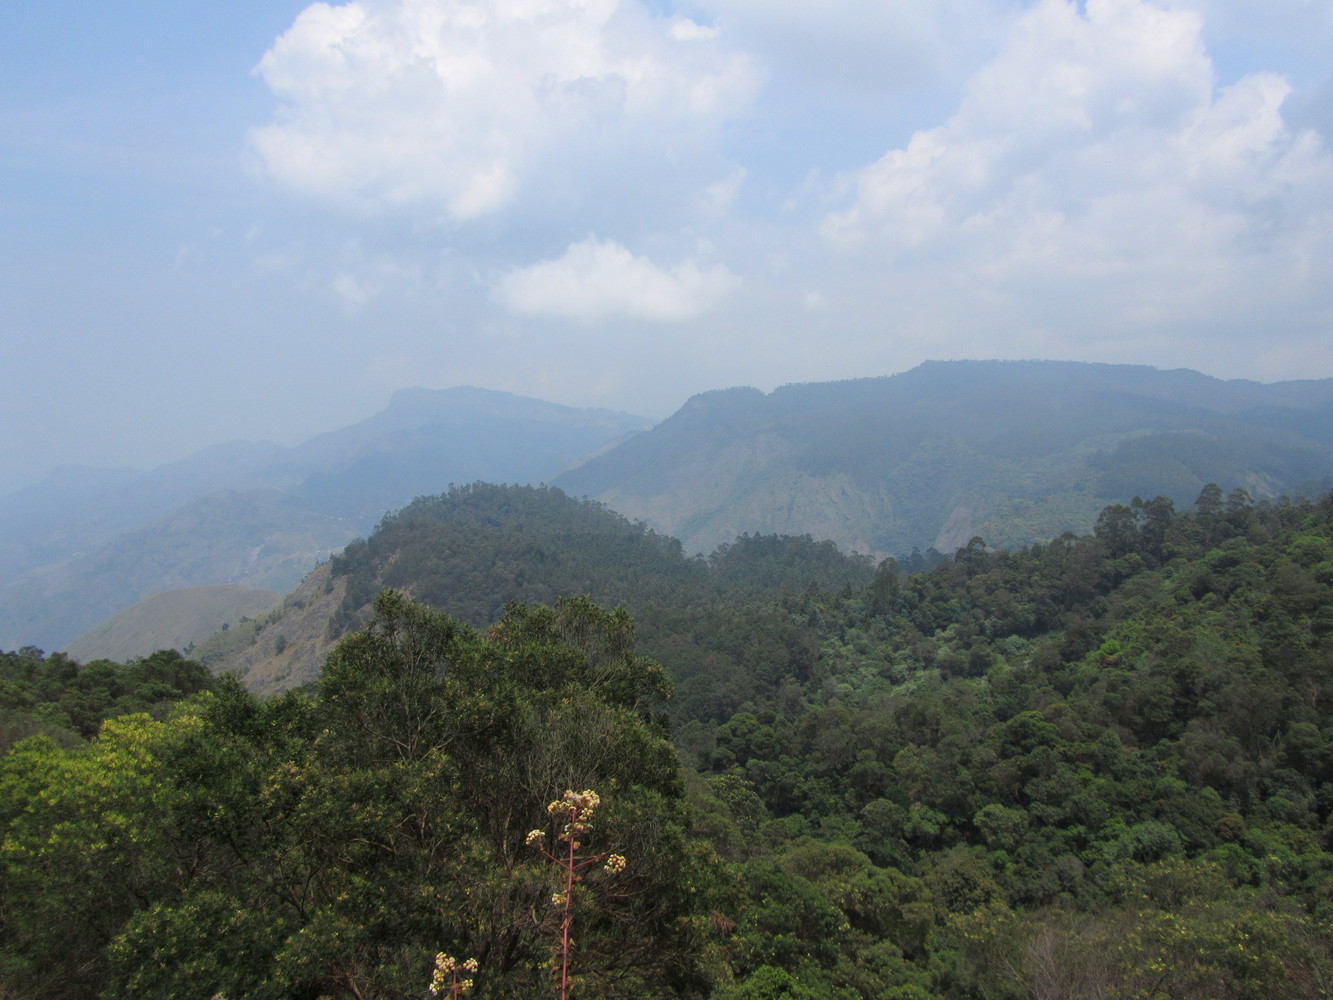 Many green tree-covered hills